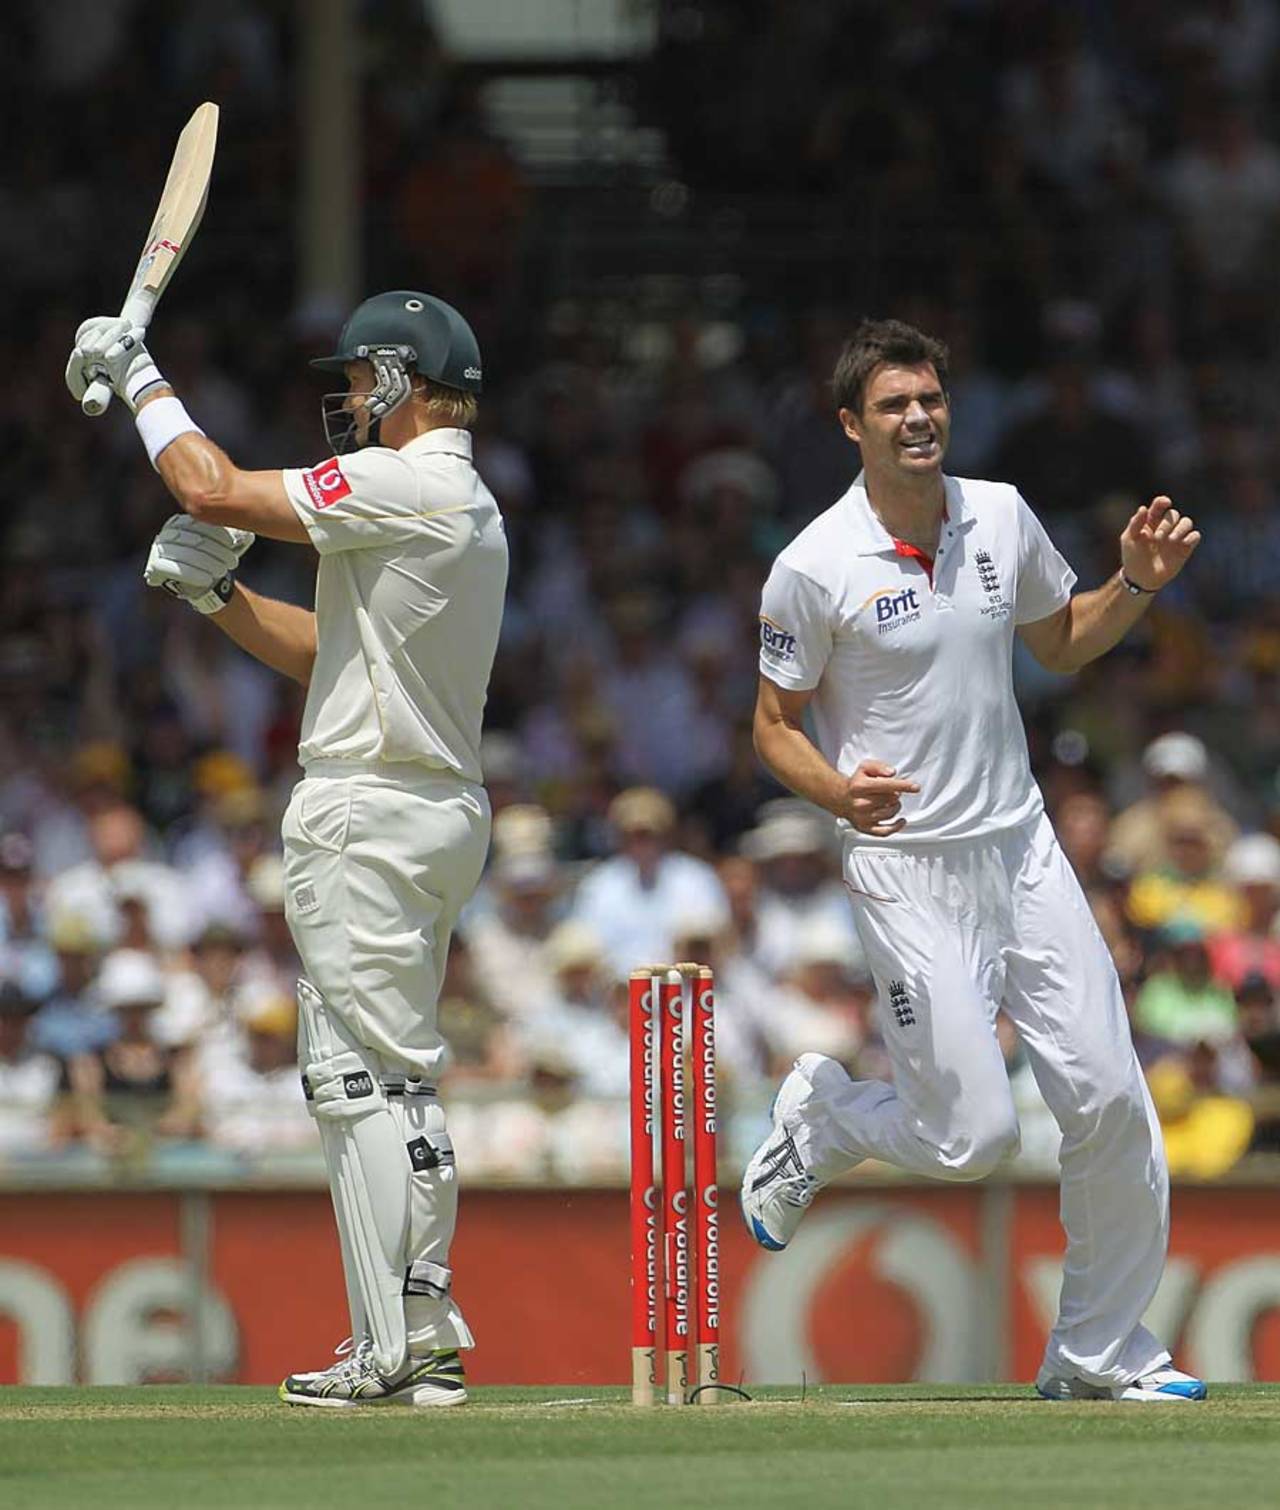 Shane Watson was saved by a review in the first over, Australia v England, 3rd Test, Perth, 1st day, December 16, 2010